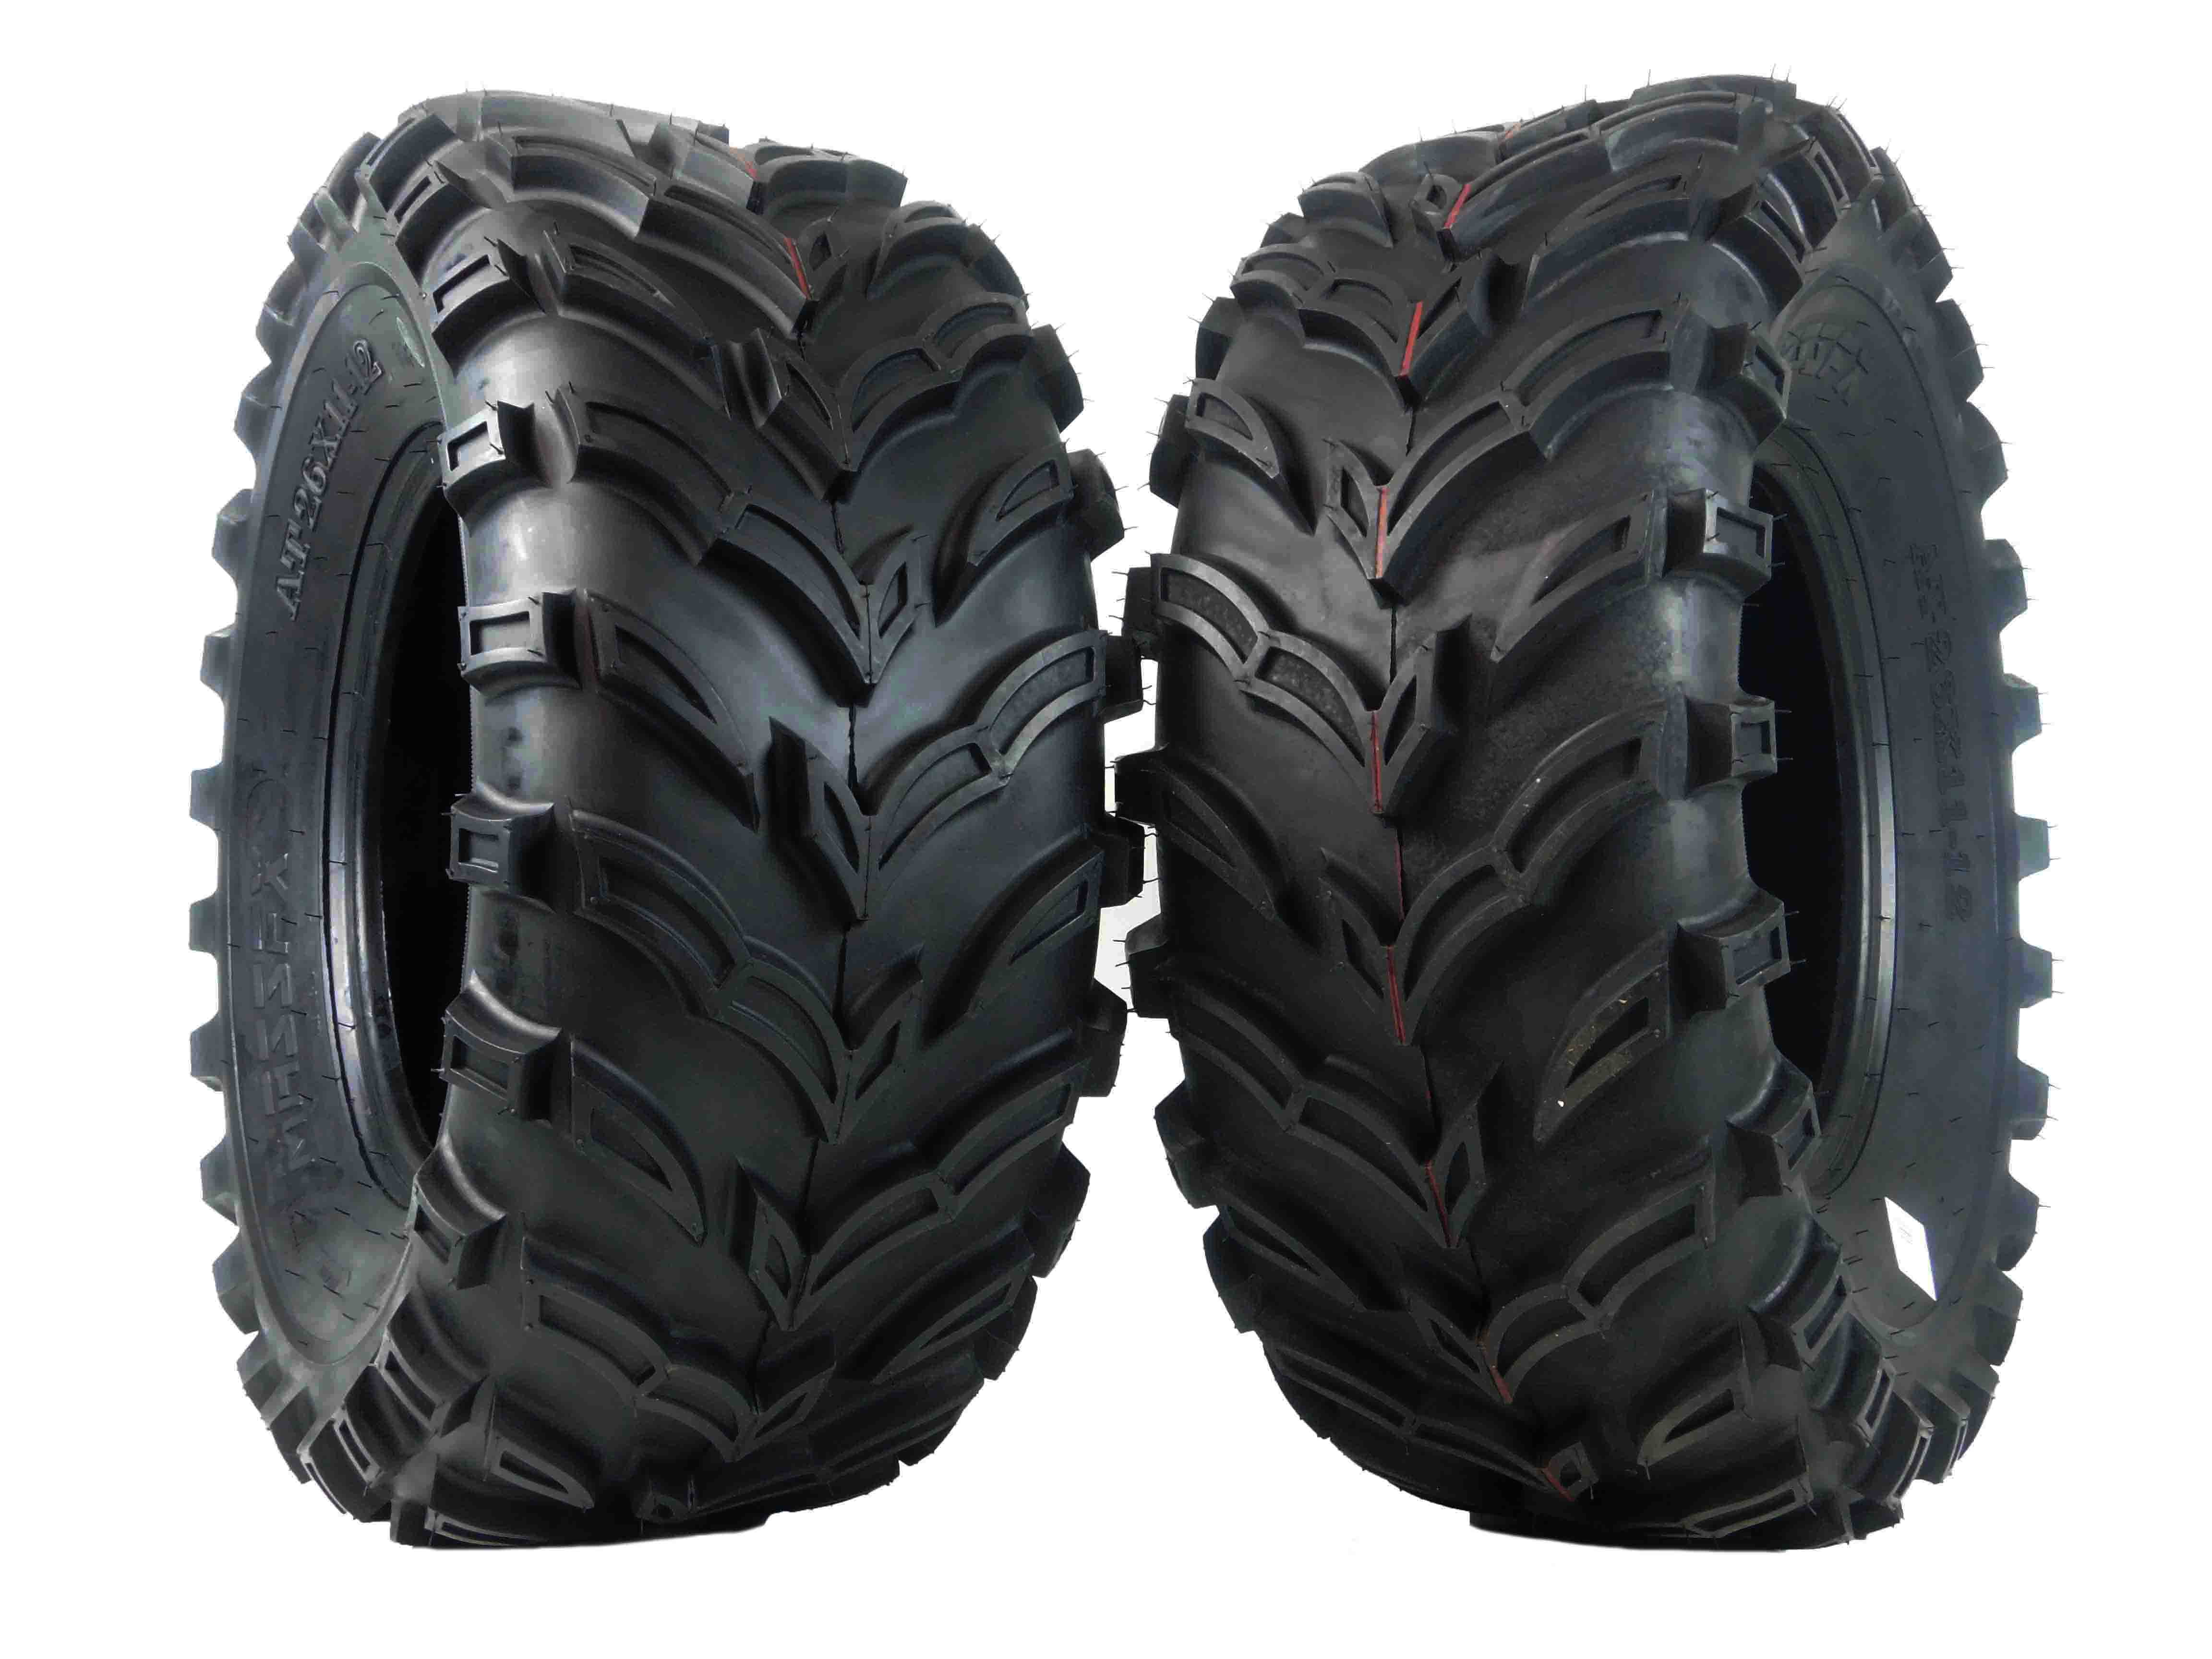 Two 26x11-12 KT MASSFX big TIRE SET two ATV TIRES SIX PLY 26 horn 